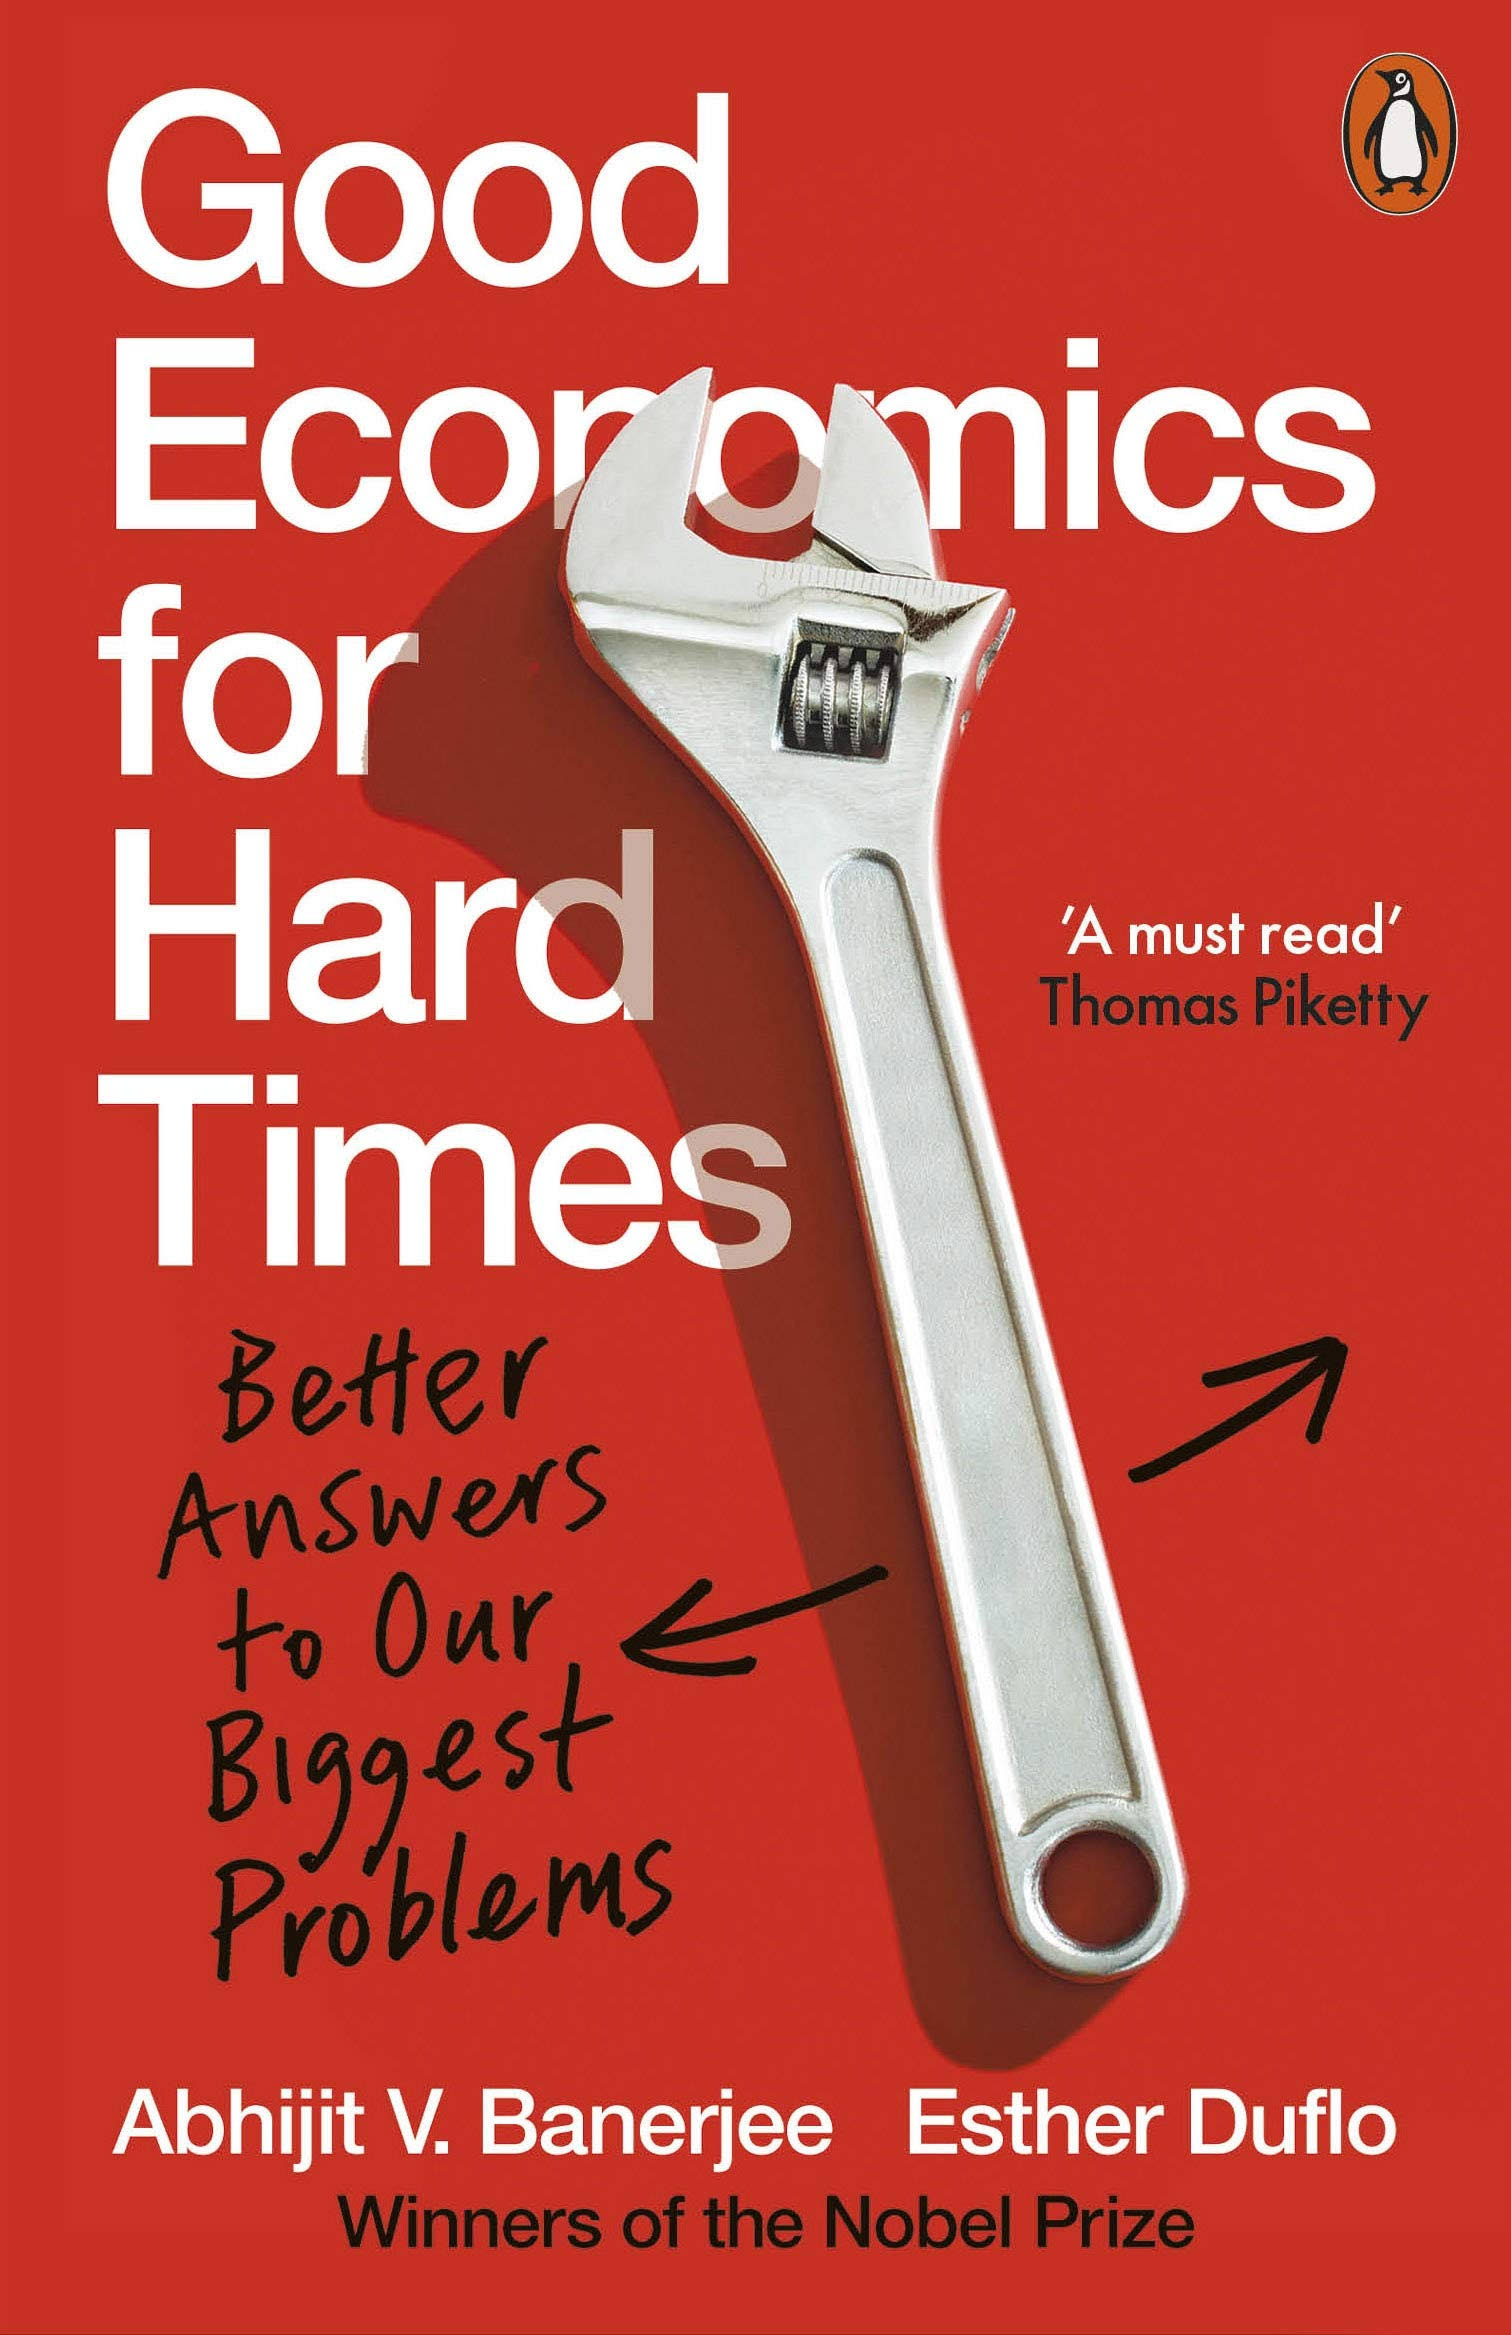 Good Economics for Hard Times: Better Answers to Our Biggest Problems [Book]